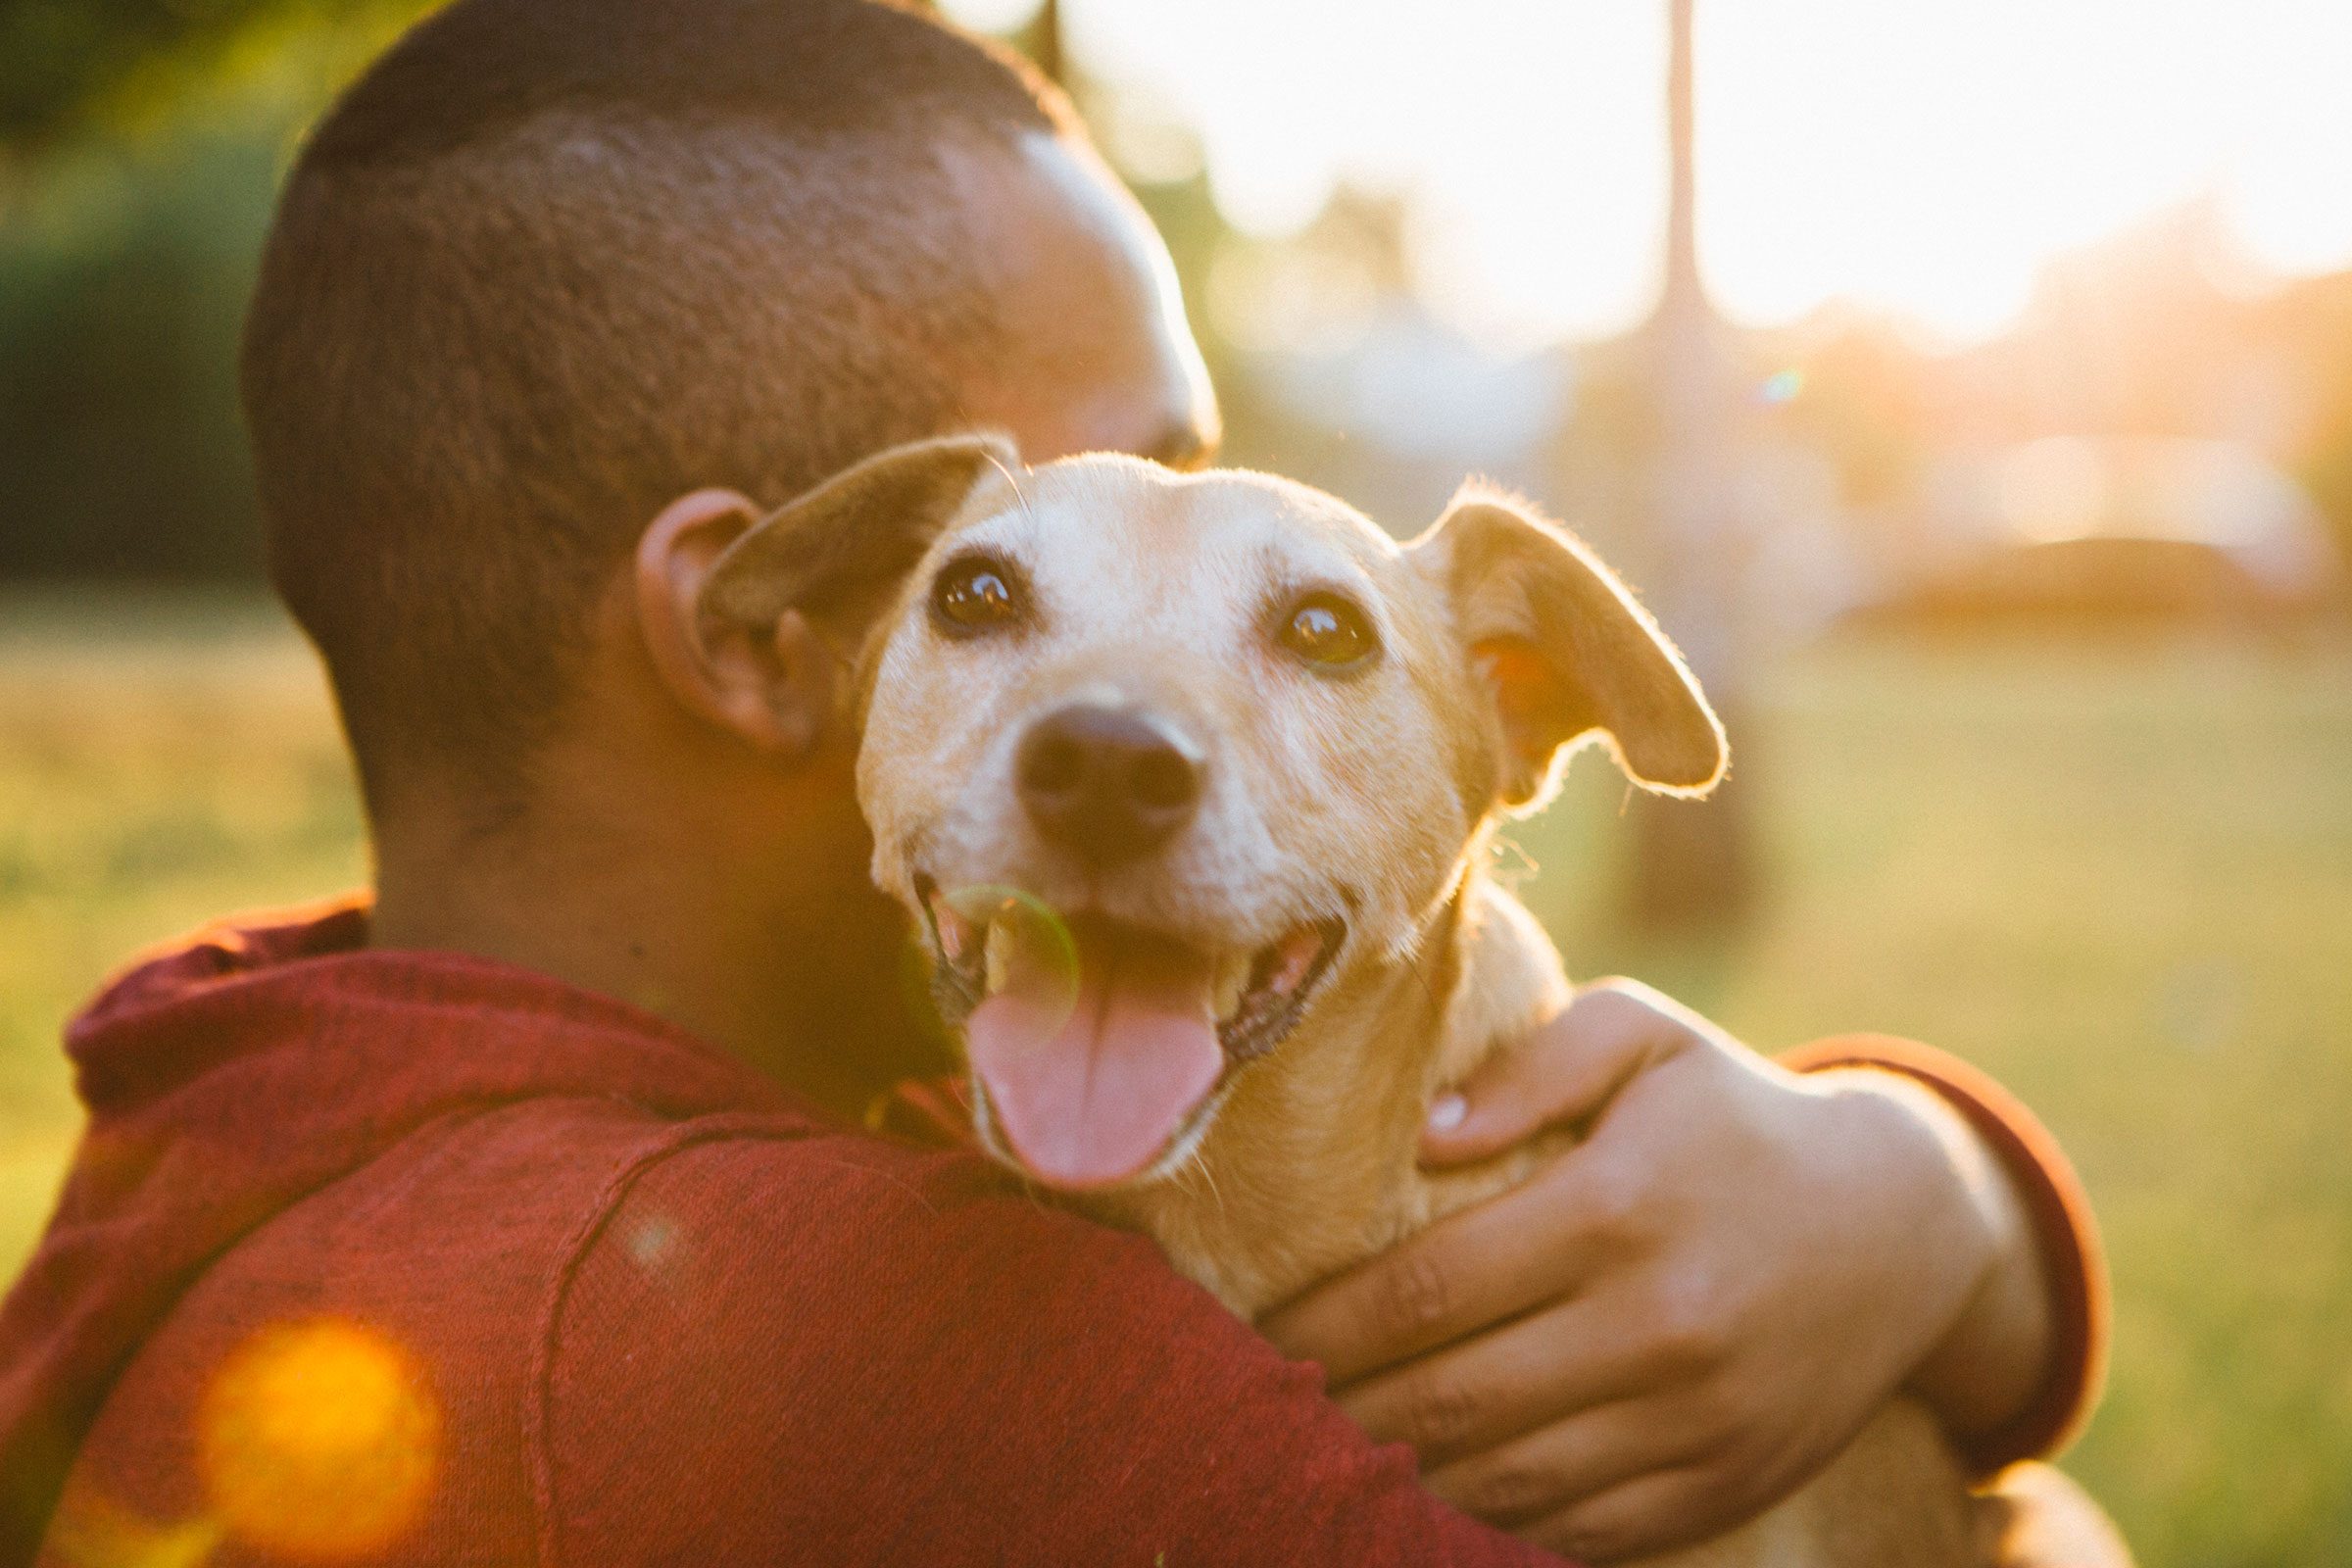 <p class="listicle-para">Loneliness has been associated with heart disease, Alzheimer’s disease, and other negative outcomes, but older adults who owned pets were 36 percent less likely to say they were lonely than those who didn’t have a furry friend, according to a study published in <em>Aging & Mental Health</em>. Especially among those who live alone, a pet could offer social interaction when other people aren’t around, the authors report. Here are <a href="https://www.rd.com/list/dog-knows-about-you/">13 astounding secrets your dog knows about you</a>.</p>